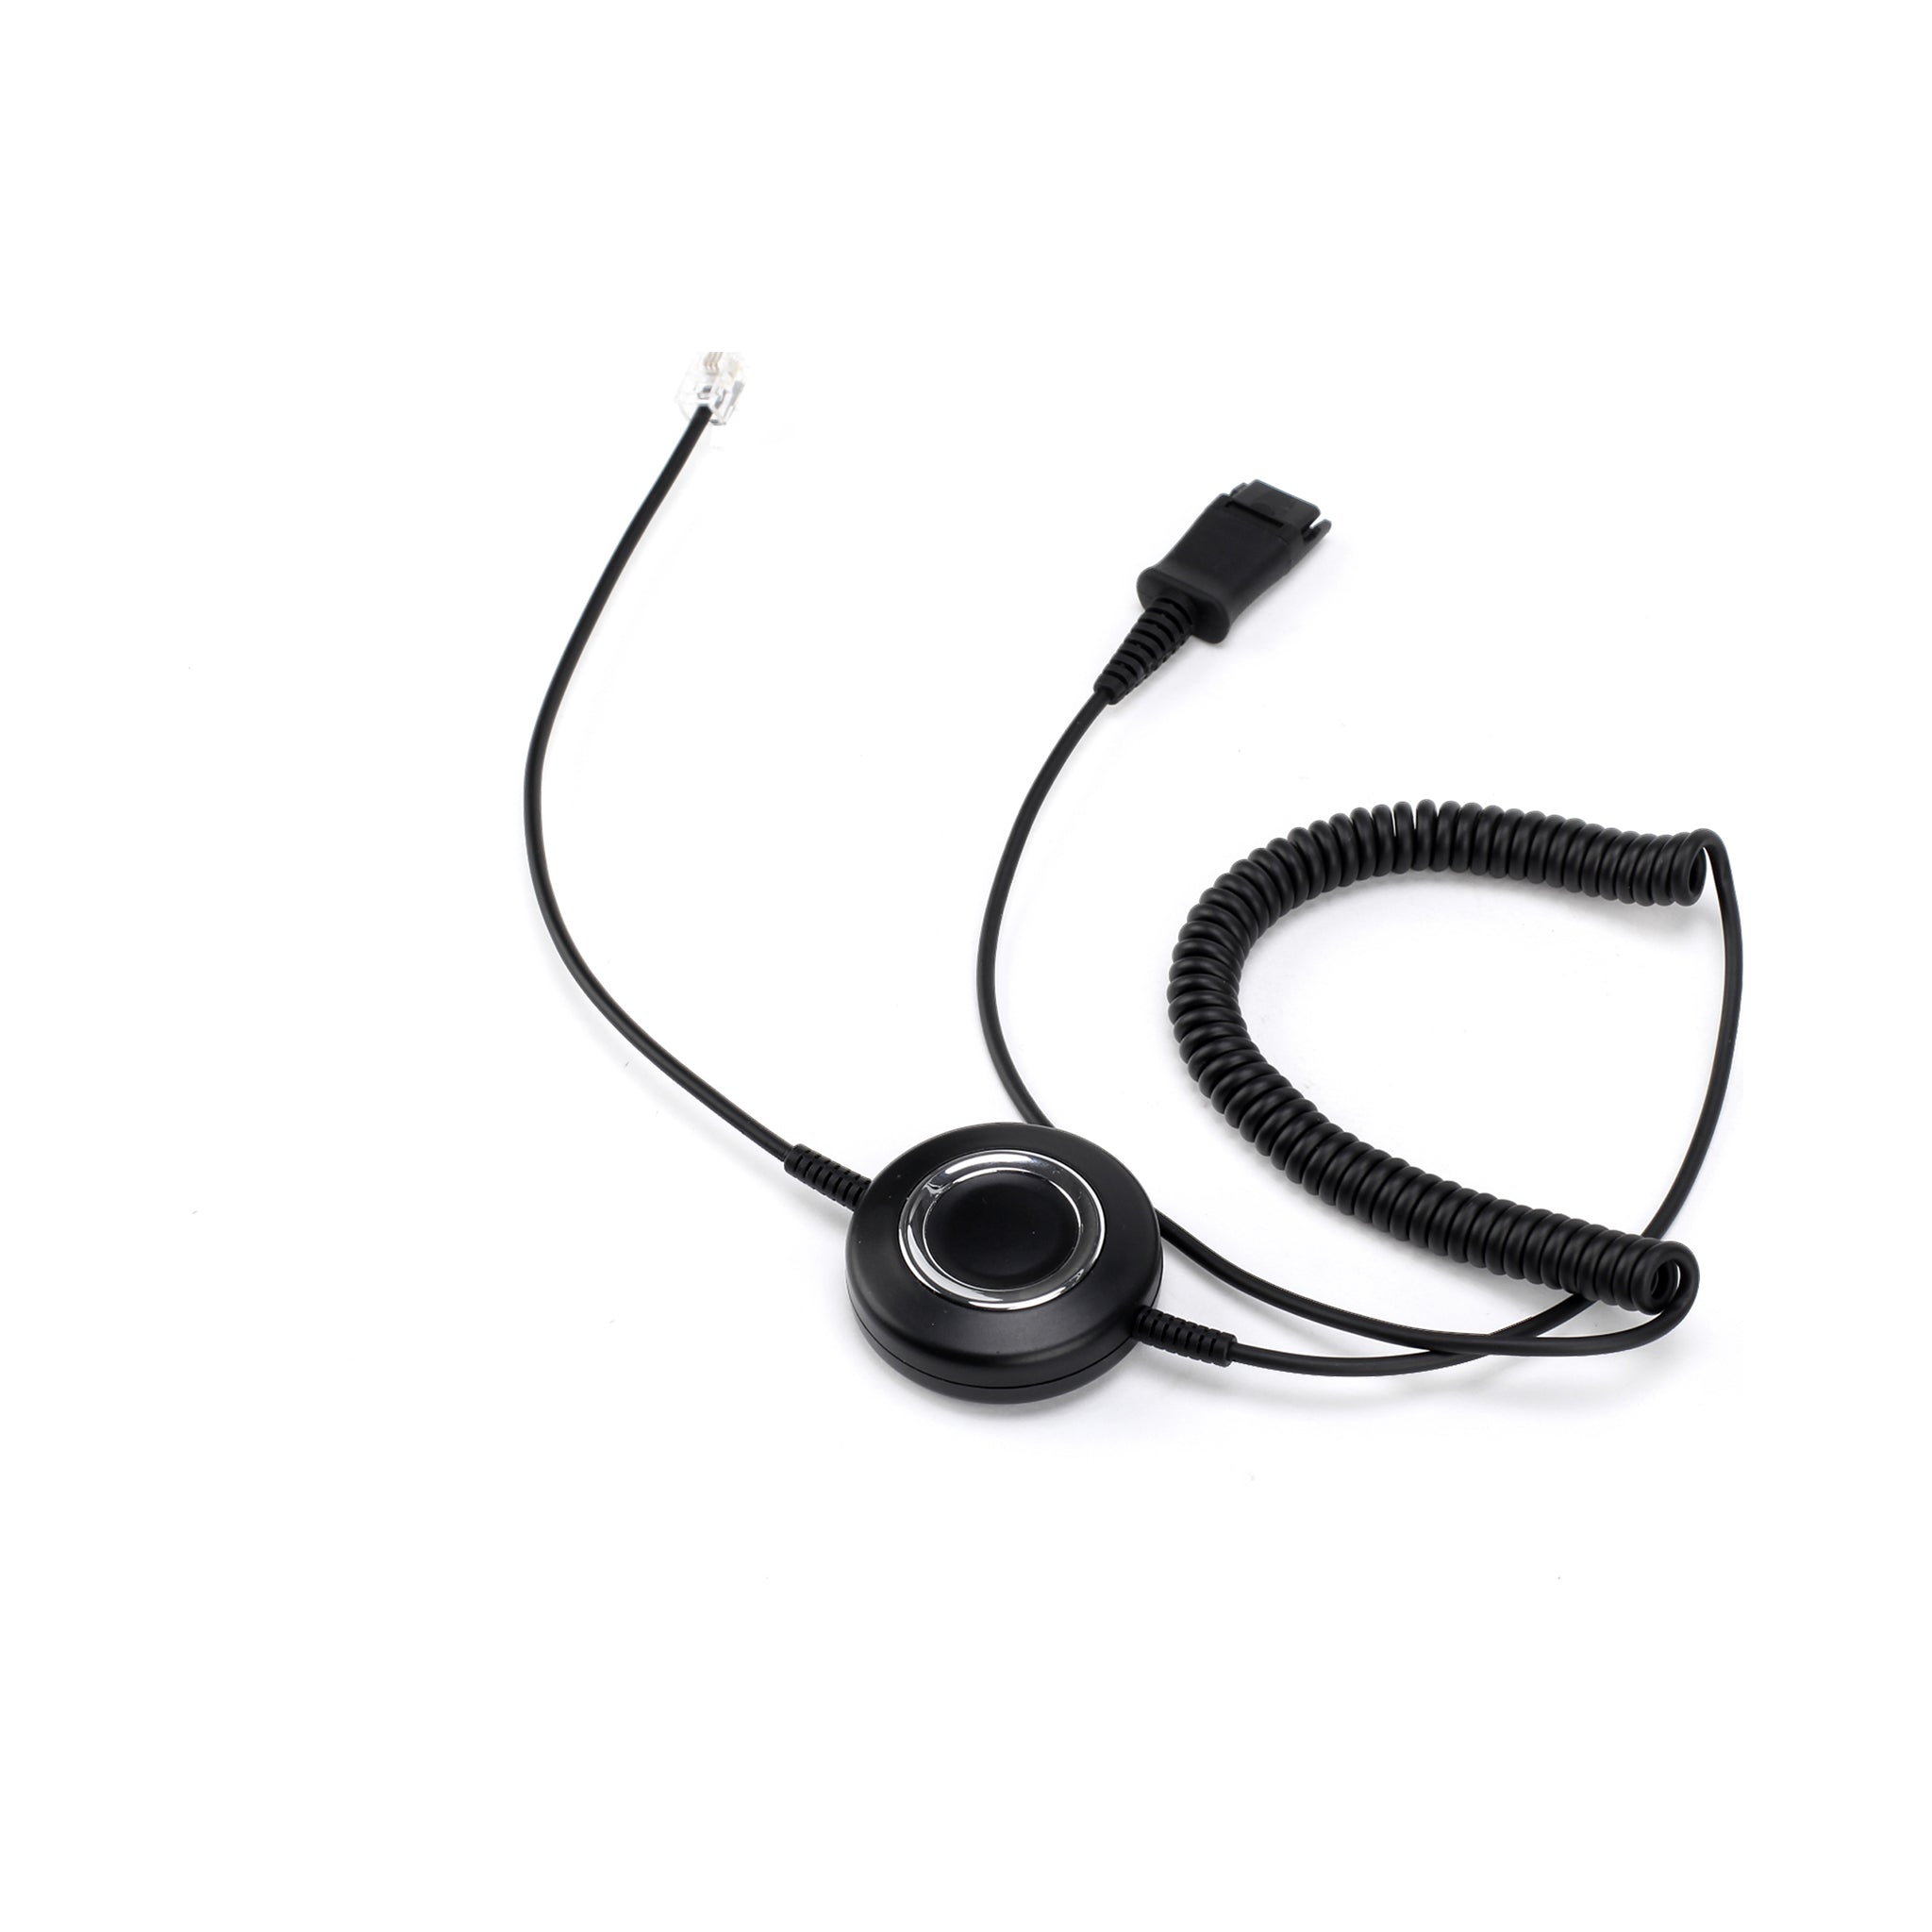 Vt Headset Convertor Smart Cord * Smart Cord - Headsets Accessories